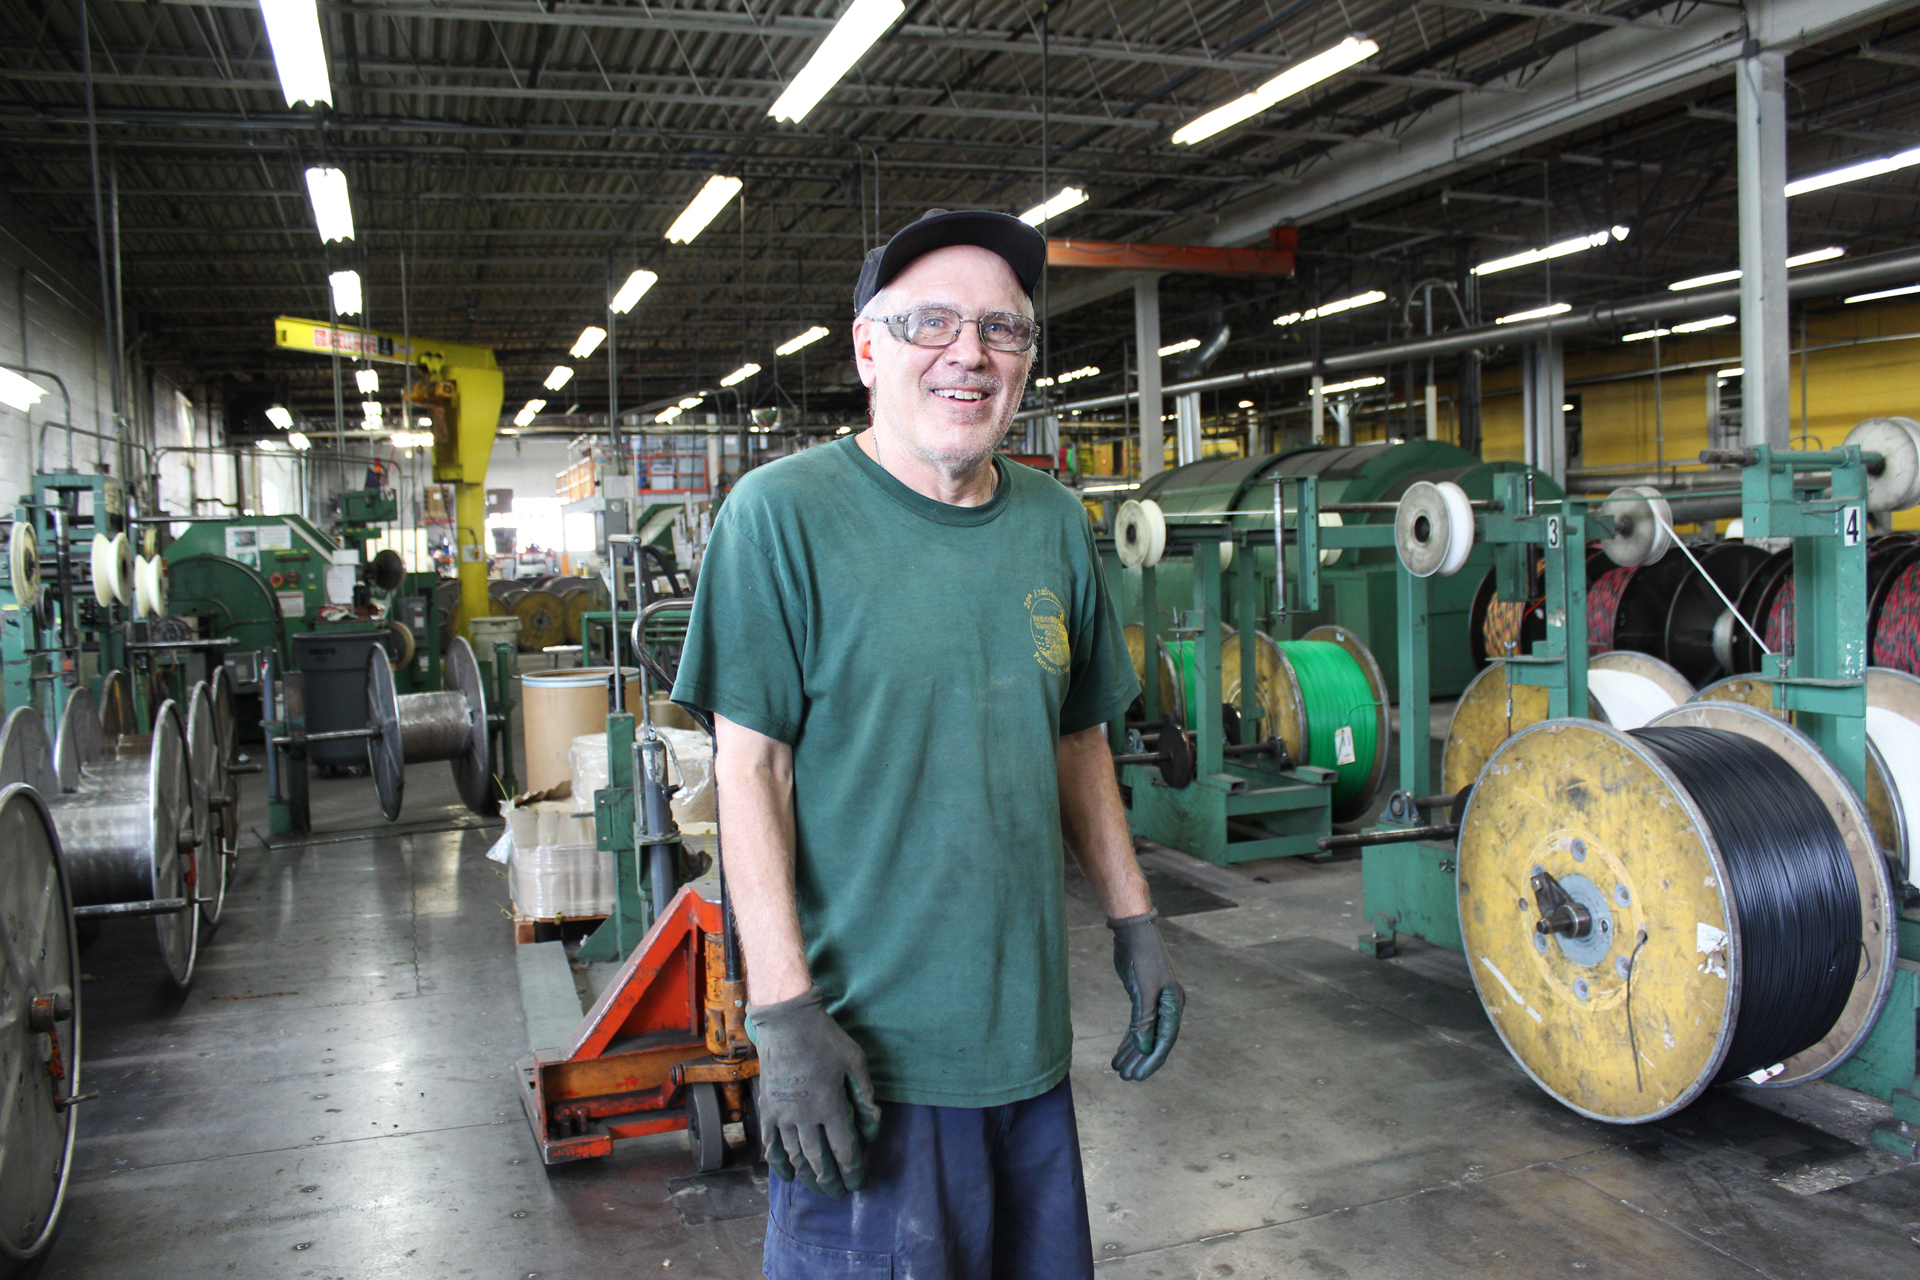 Celebration our Employees - August Honoree Bob Bingaman